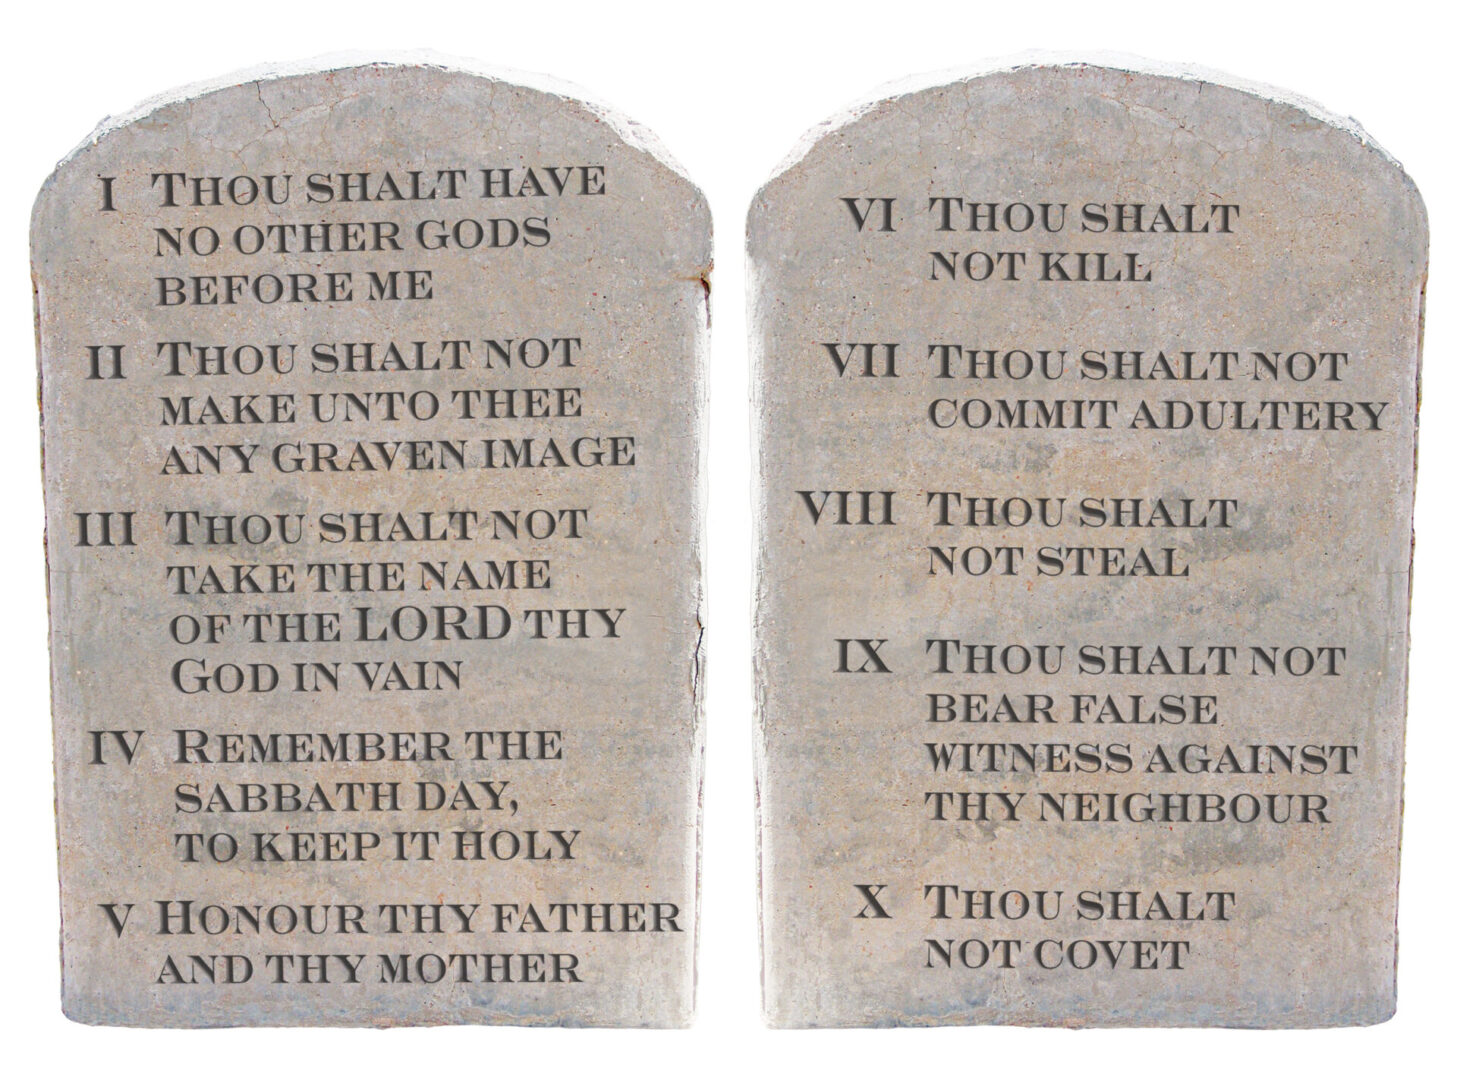 A pair of stone tablets with verses on them.